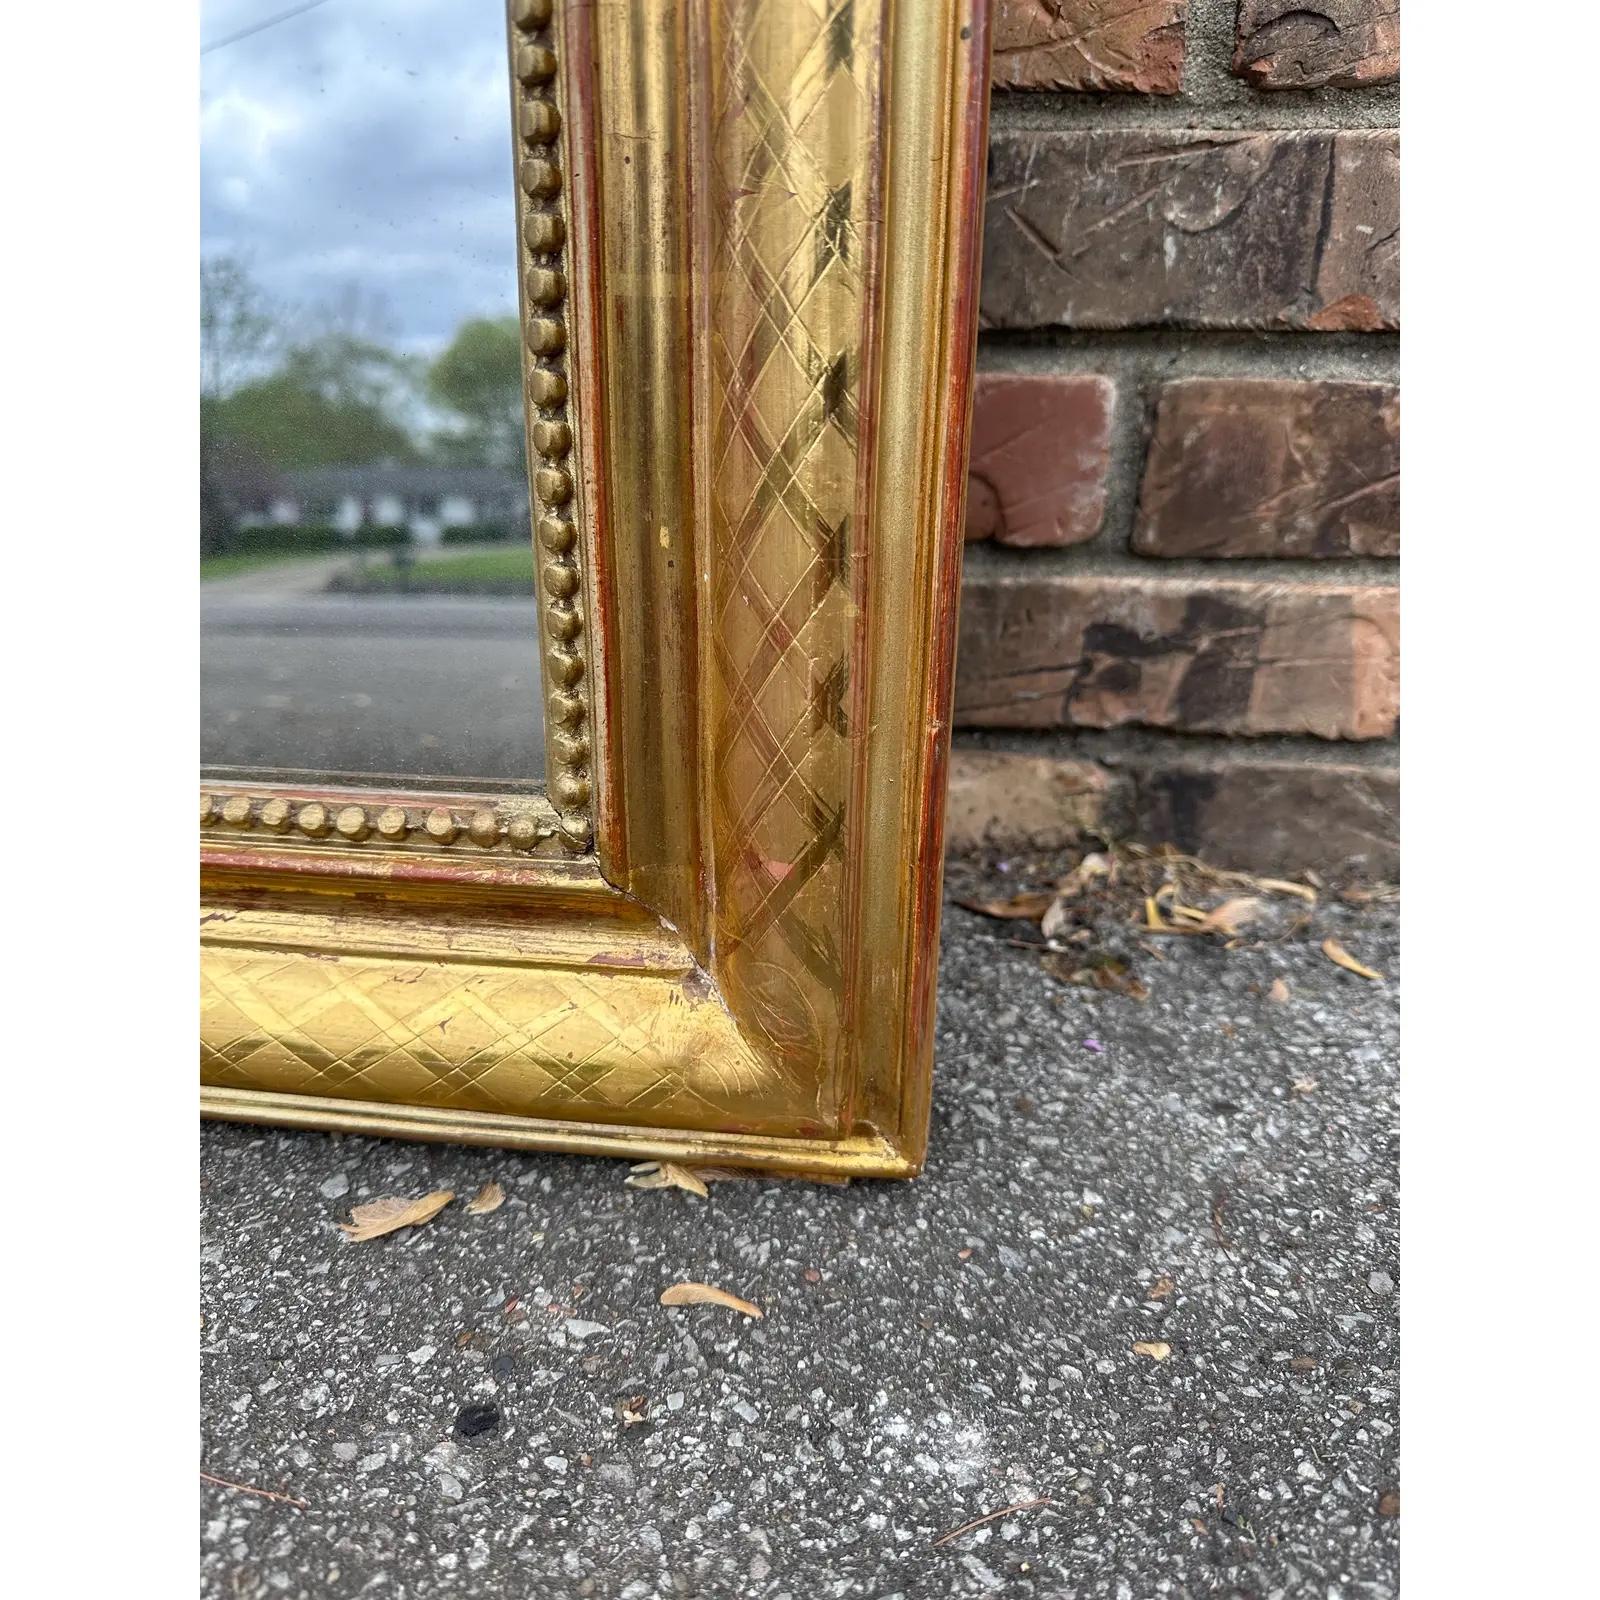 This exquisite Antique Louis Philippe Mirror, adorned with a gilded finish, effortlessly brings timeless charm to any space. Its ornate detailing and classic design make it a captivating centerpiece, reflecting both style and history in a single